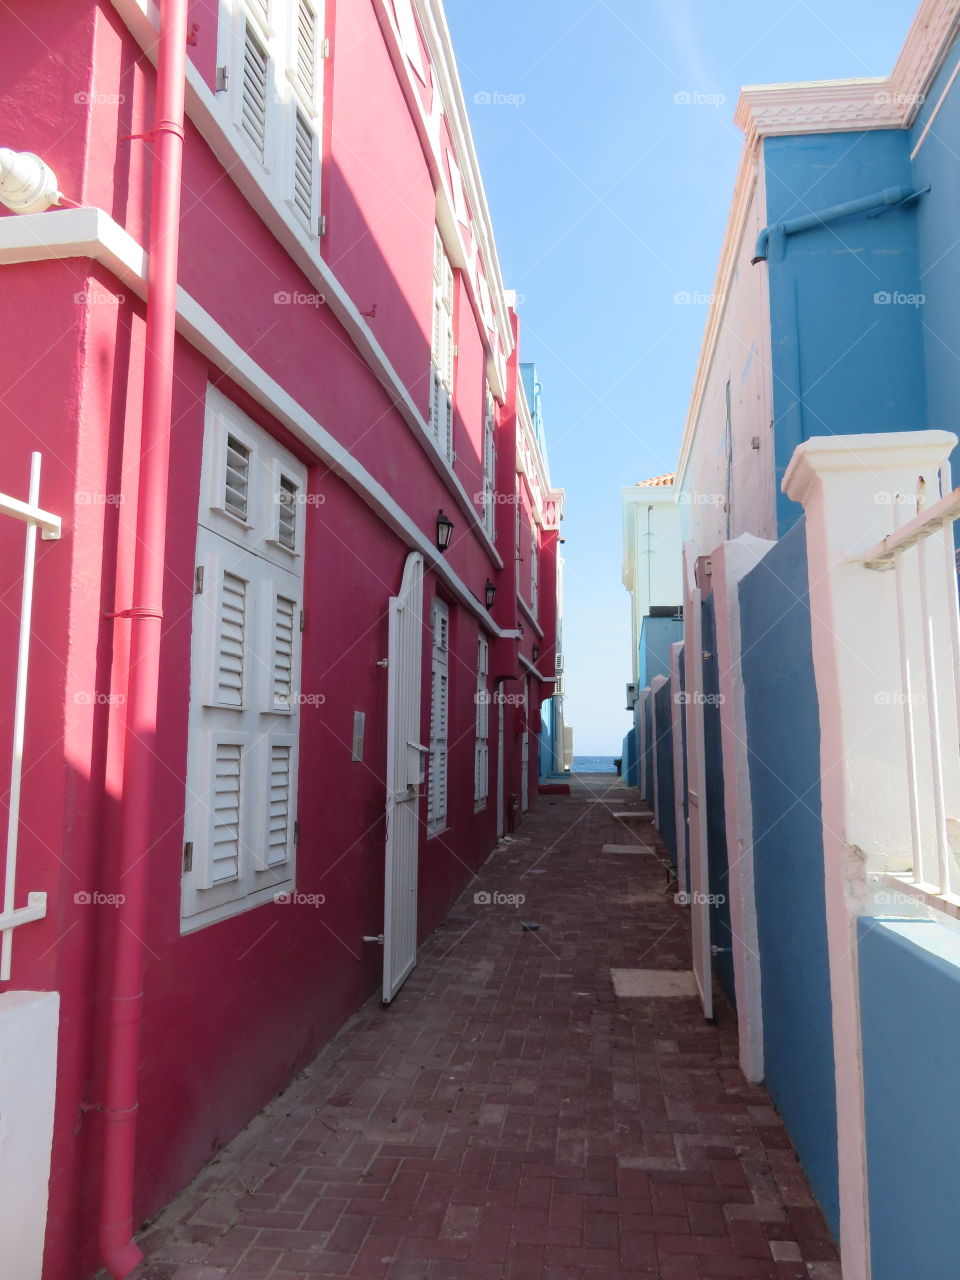 Summer vibes - colorful buildings alongside an alley leading to the Carribean Sea